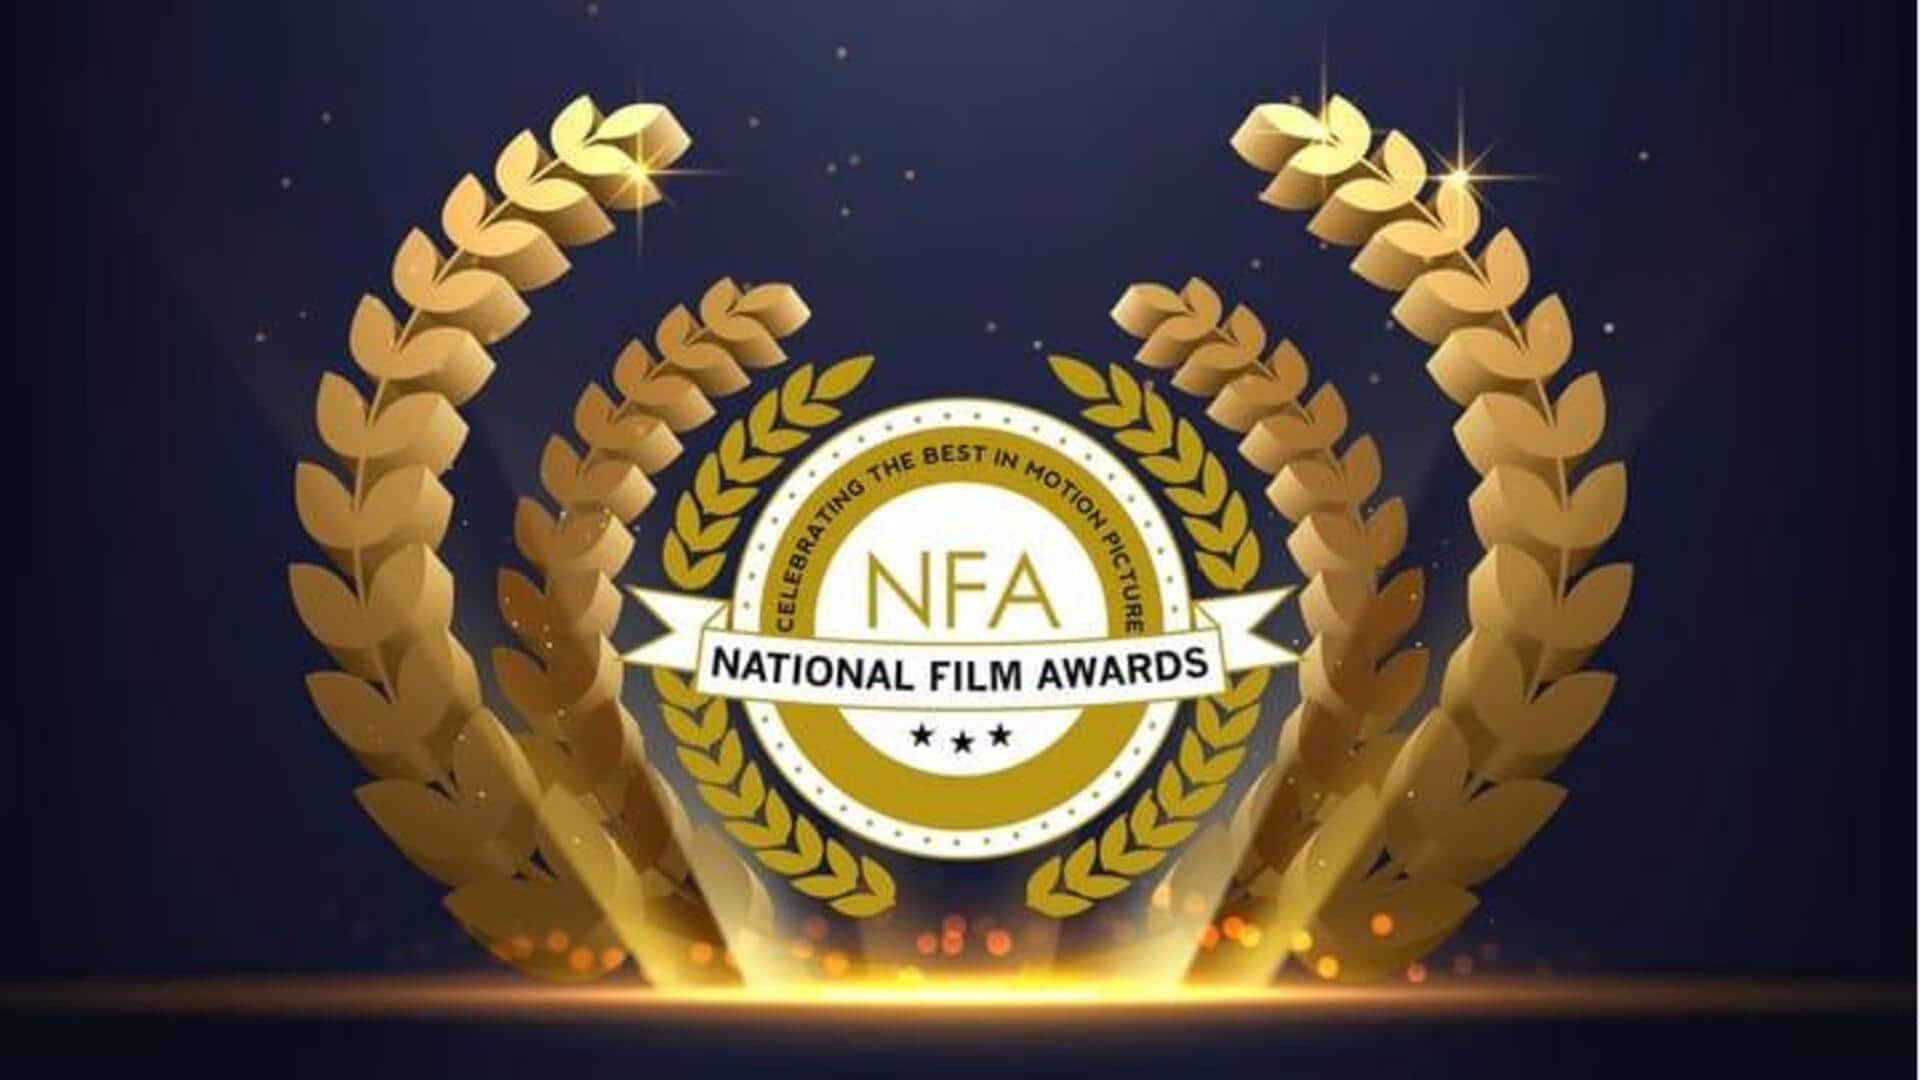 69th National Film Awards are out! Did your favorite win